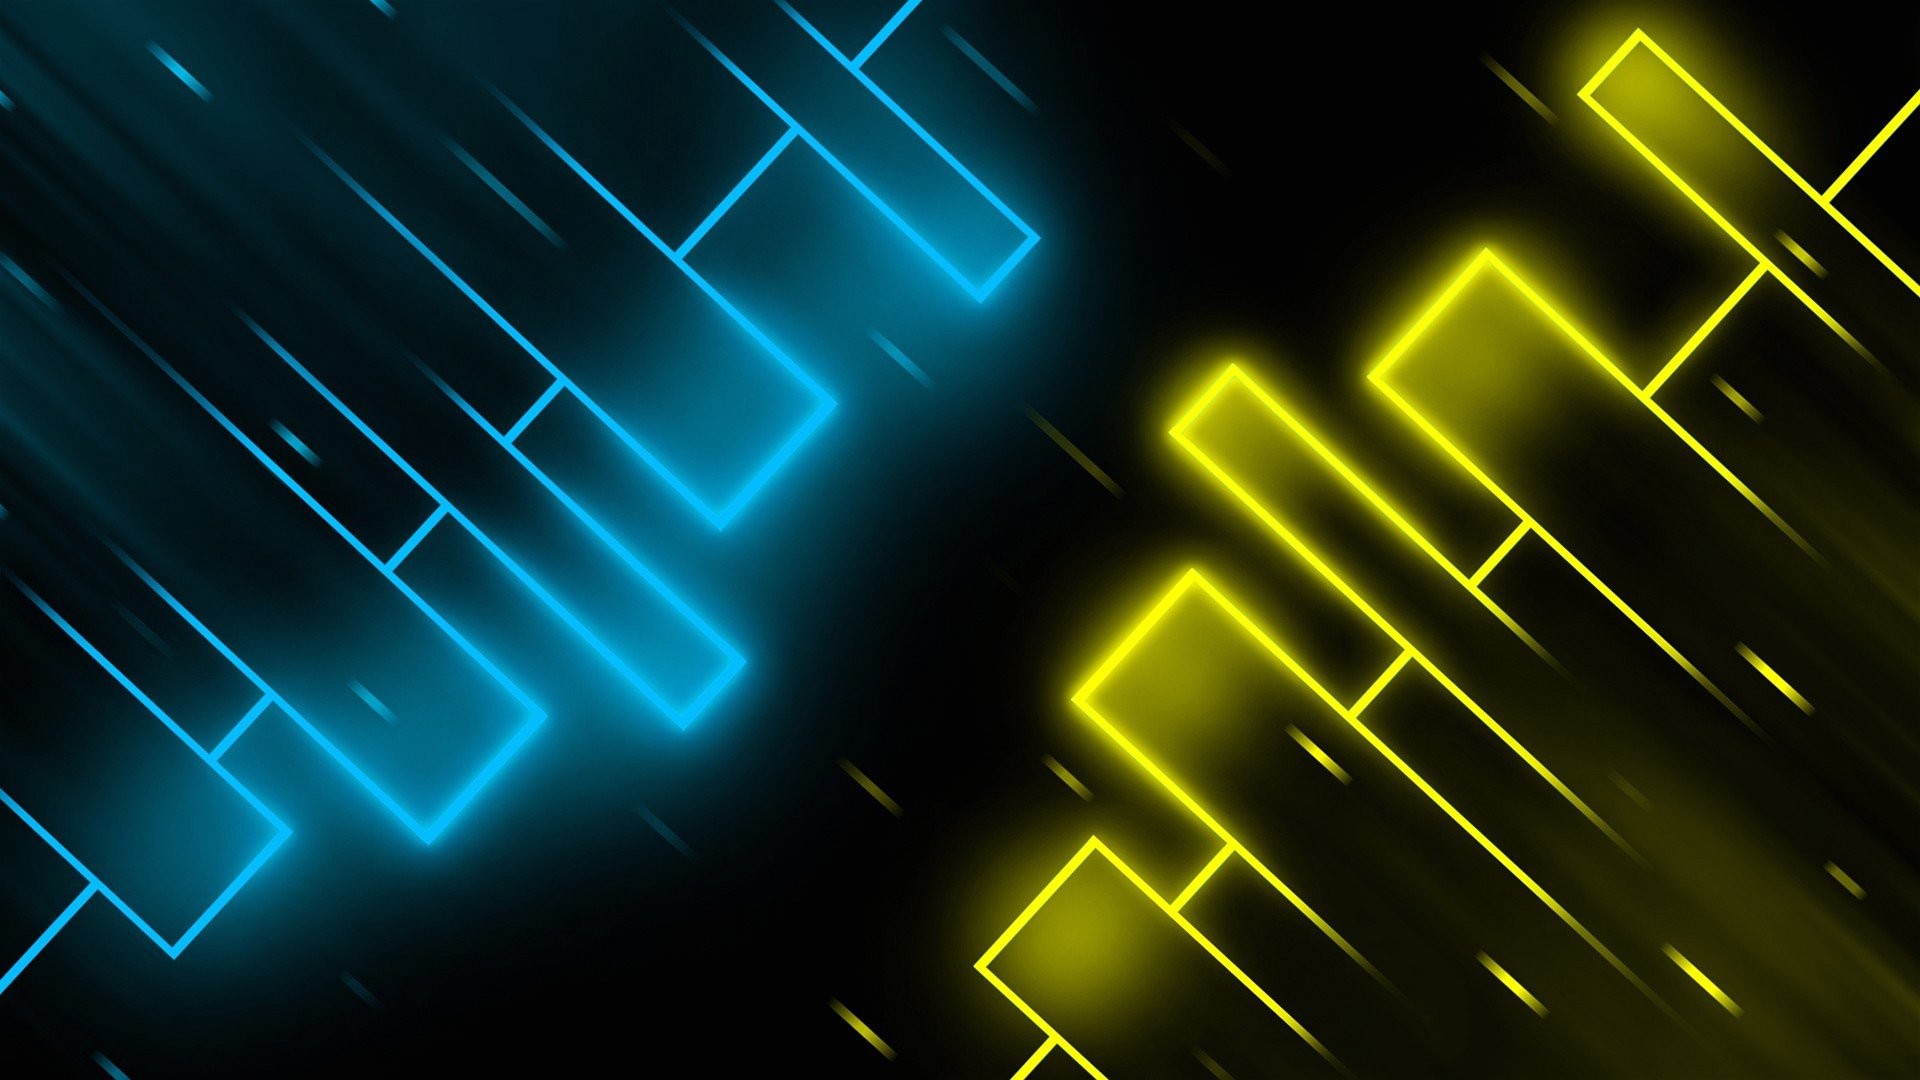 1920x1080 Wallpaper squared lines abstract 1920 x 1080 full hd